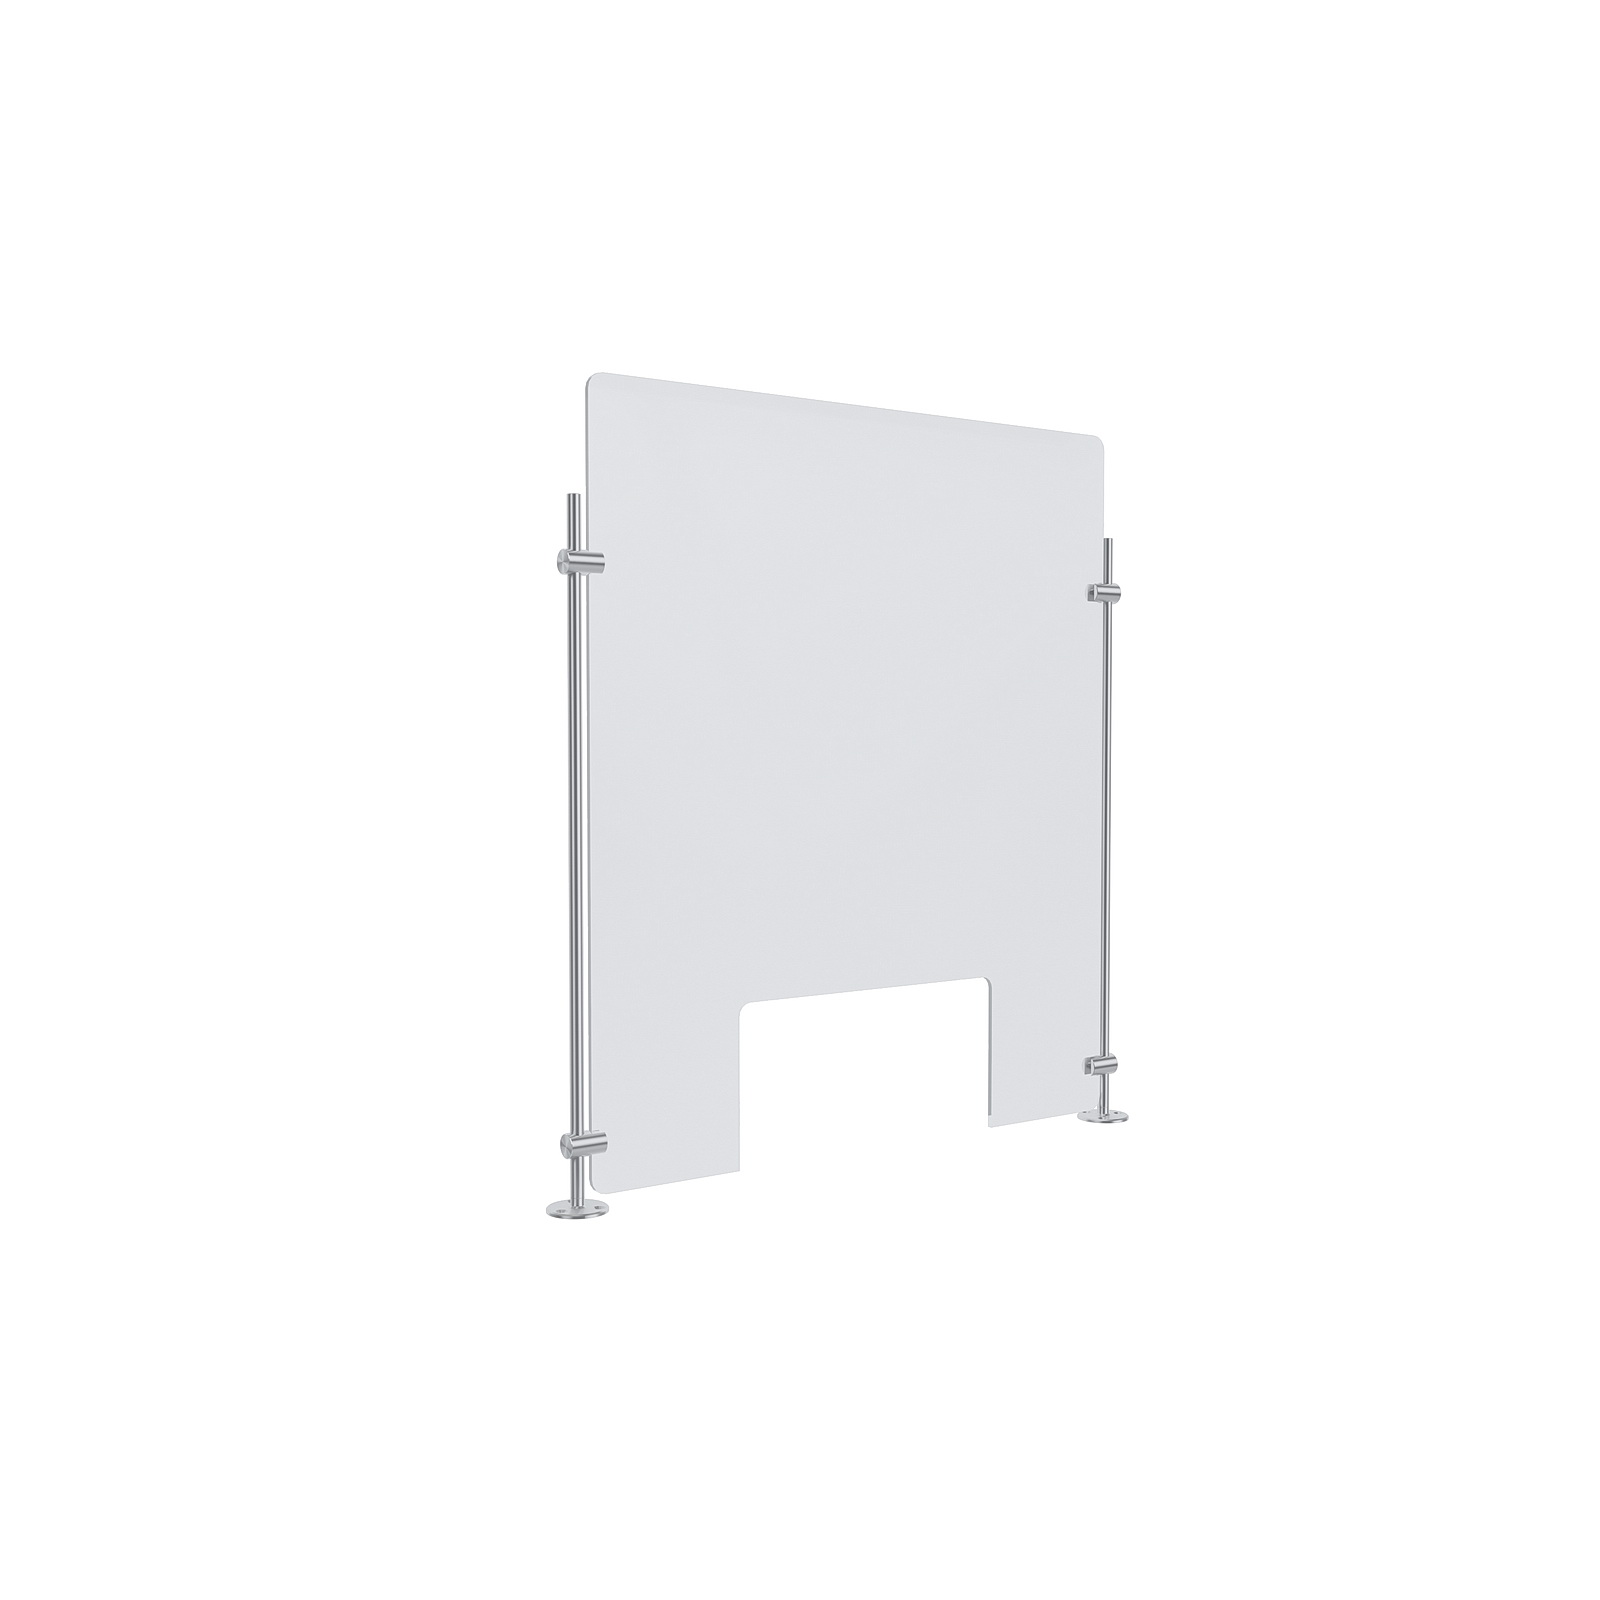 Clear Acrylic Sneeze Guard 20'' Wide x 23-1/2'' Tall (10'' x 5'' Cut Out), with (2) 20'' Tall x 3/8'' Diameter Clear Anodized Aluminum Rod on the Side.